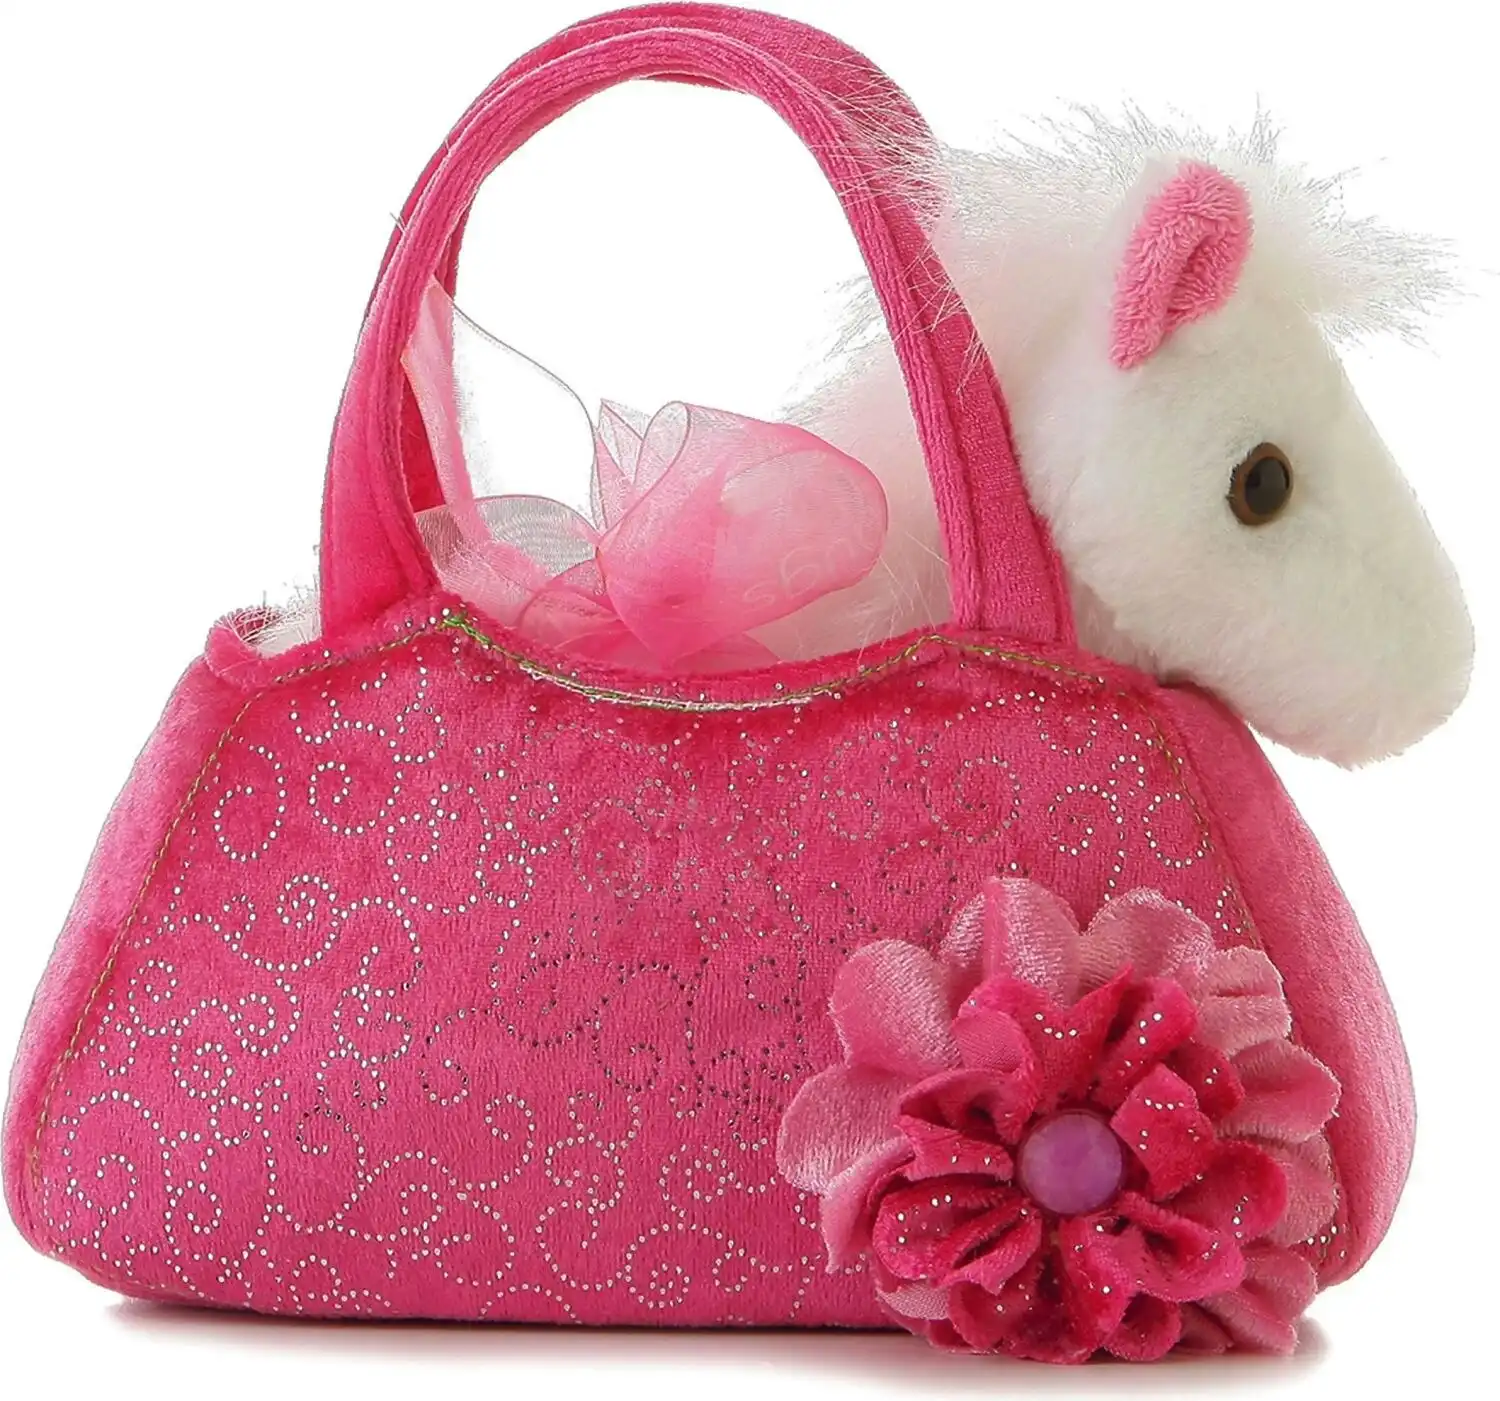 Cotton Candy - Fancy Pals Pony In Pink Bag